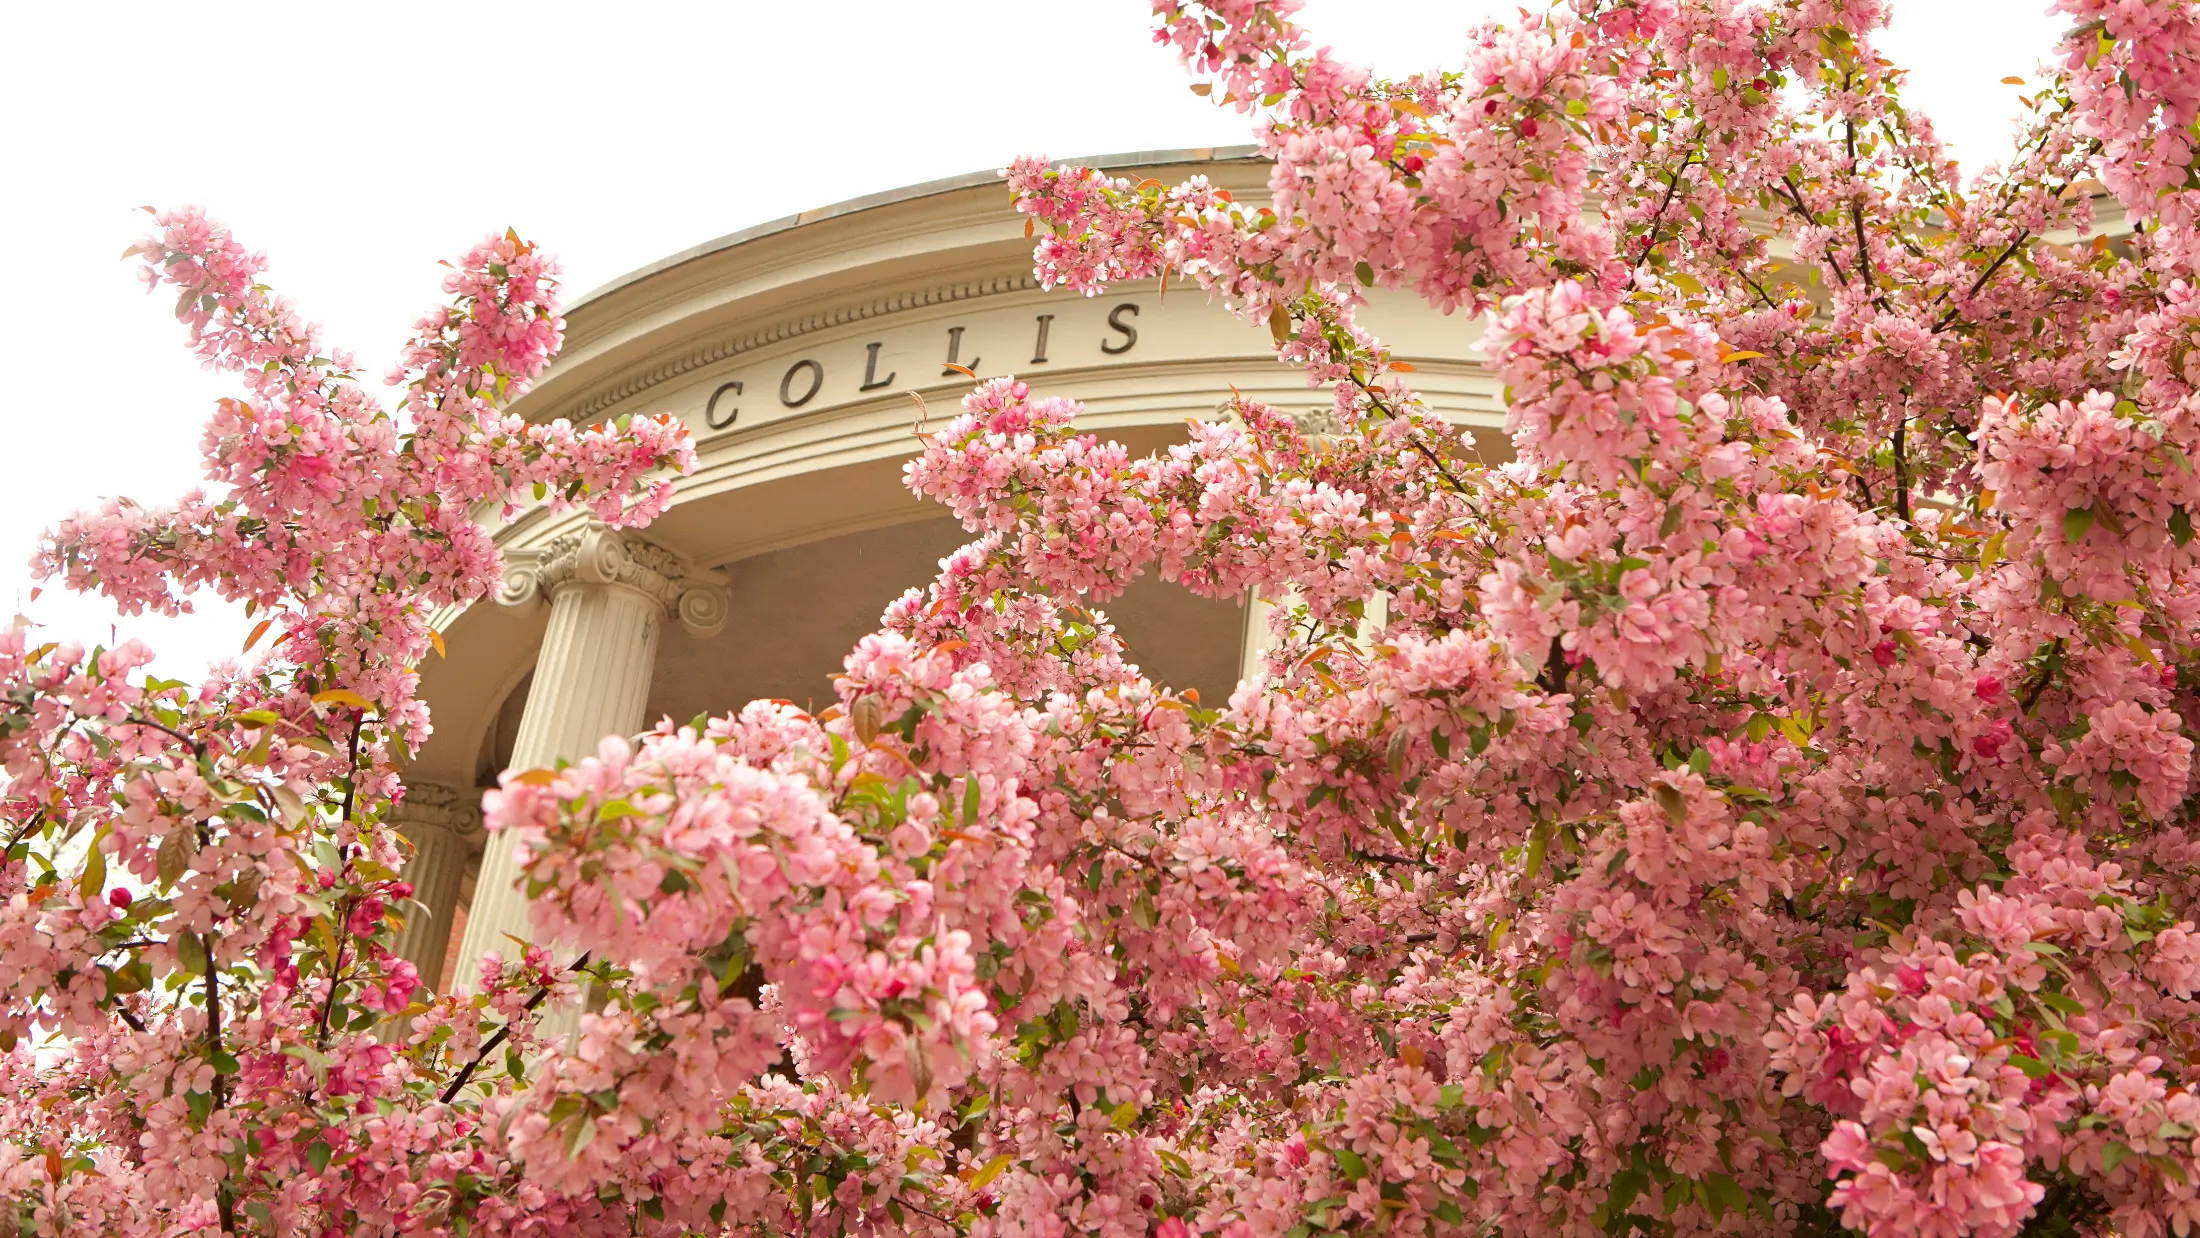 Pink spring blossoms and flowering trees in front of the Collis Student Center, Dartmouth College in Hanover, NH.